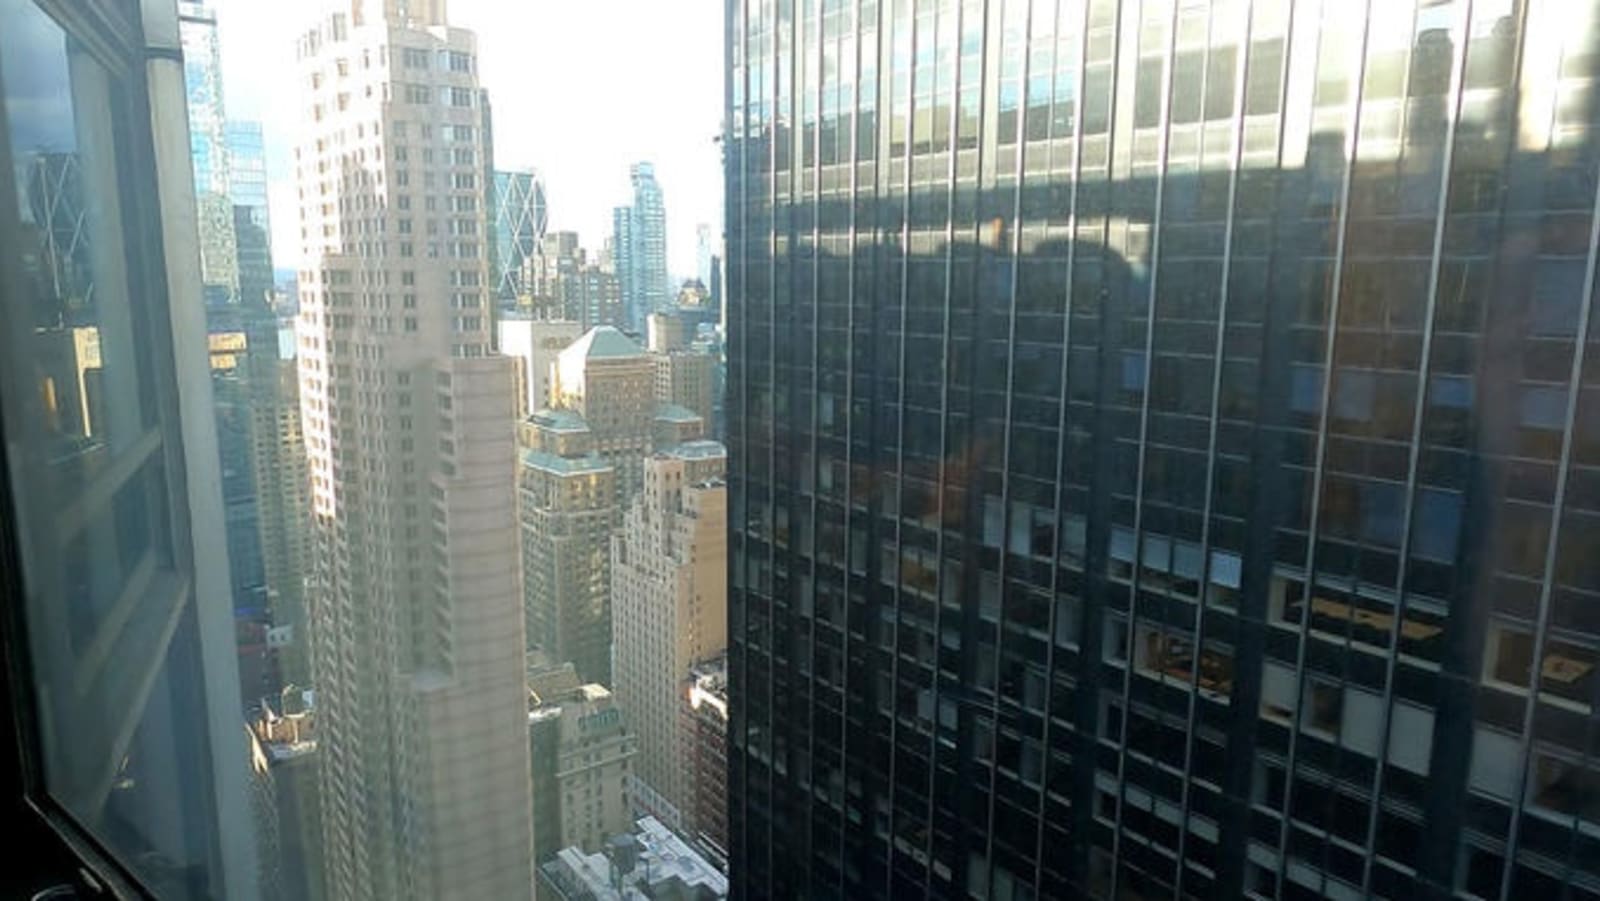 View from my Executive Suite at the New York Hilton Midtown